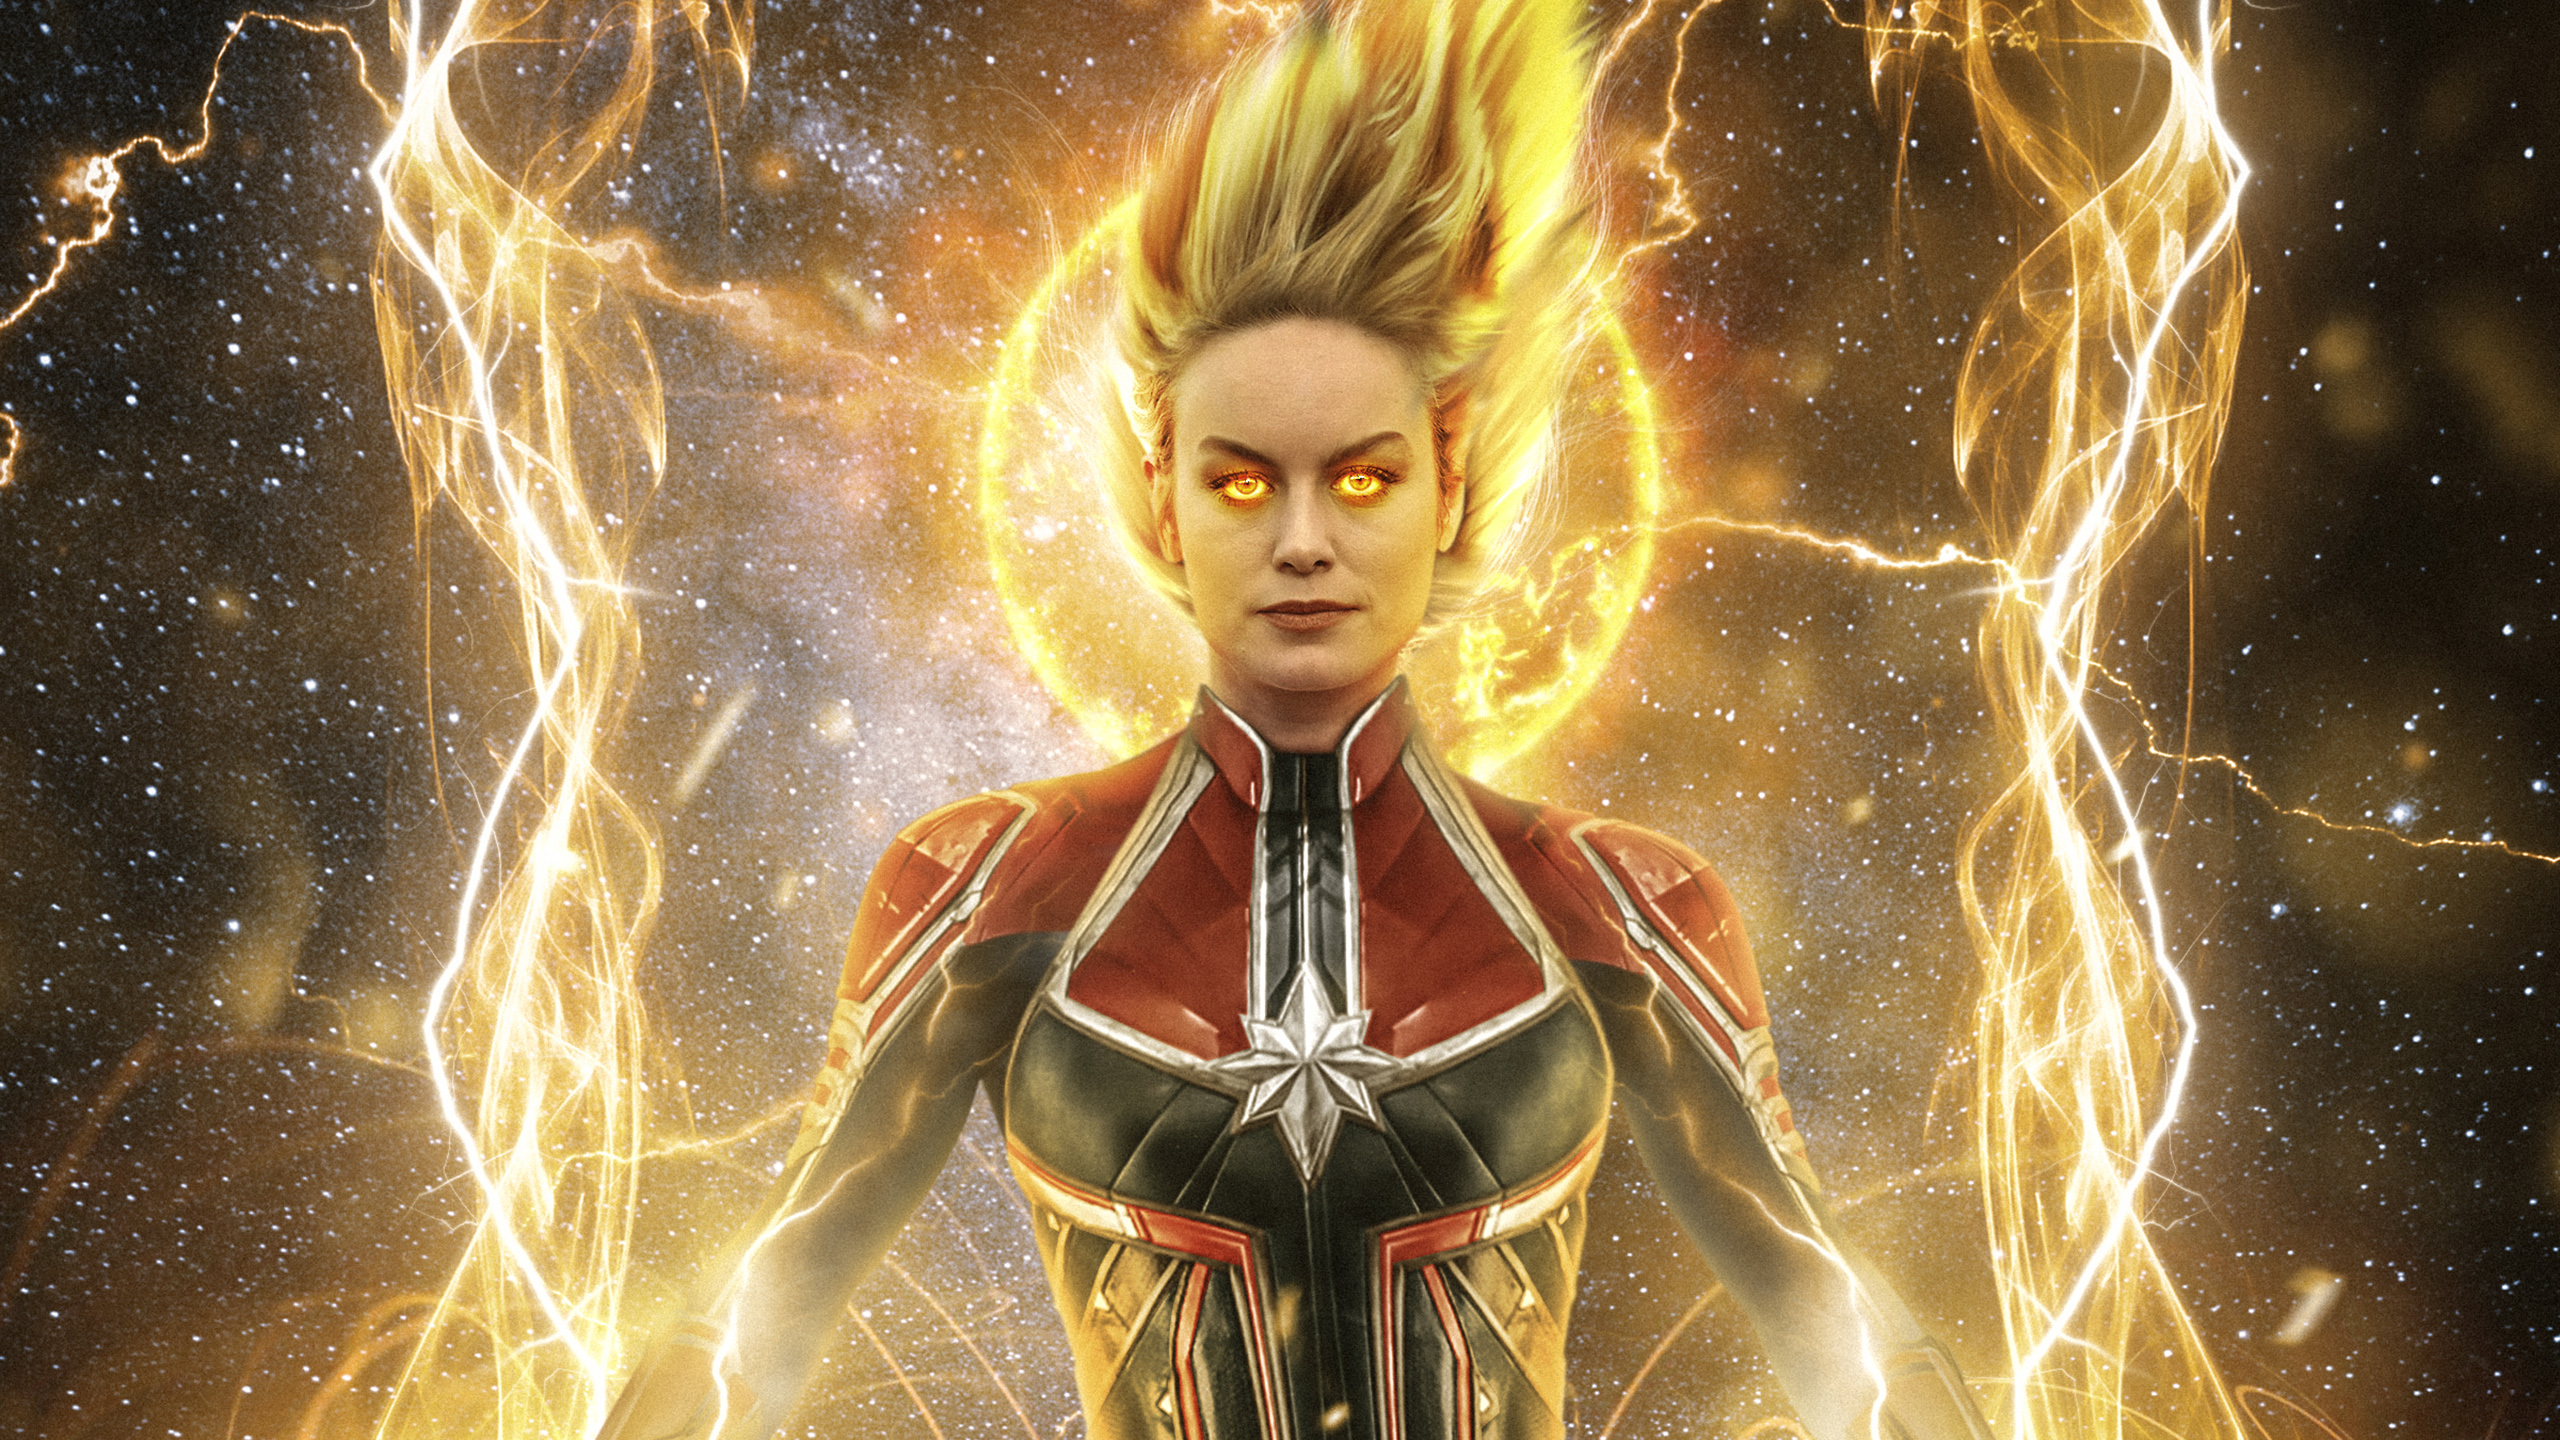 Brie Larson as Captain Marvel Wallpapers | HD Wallpapers